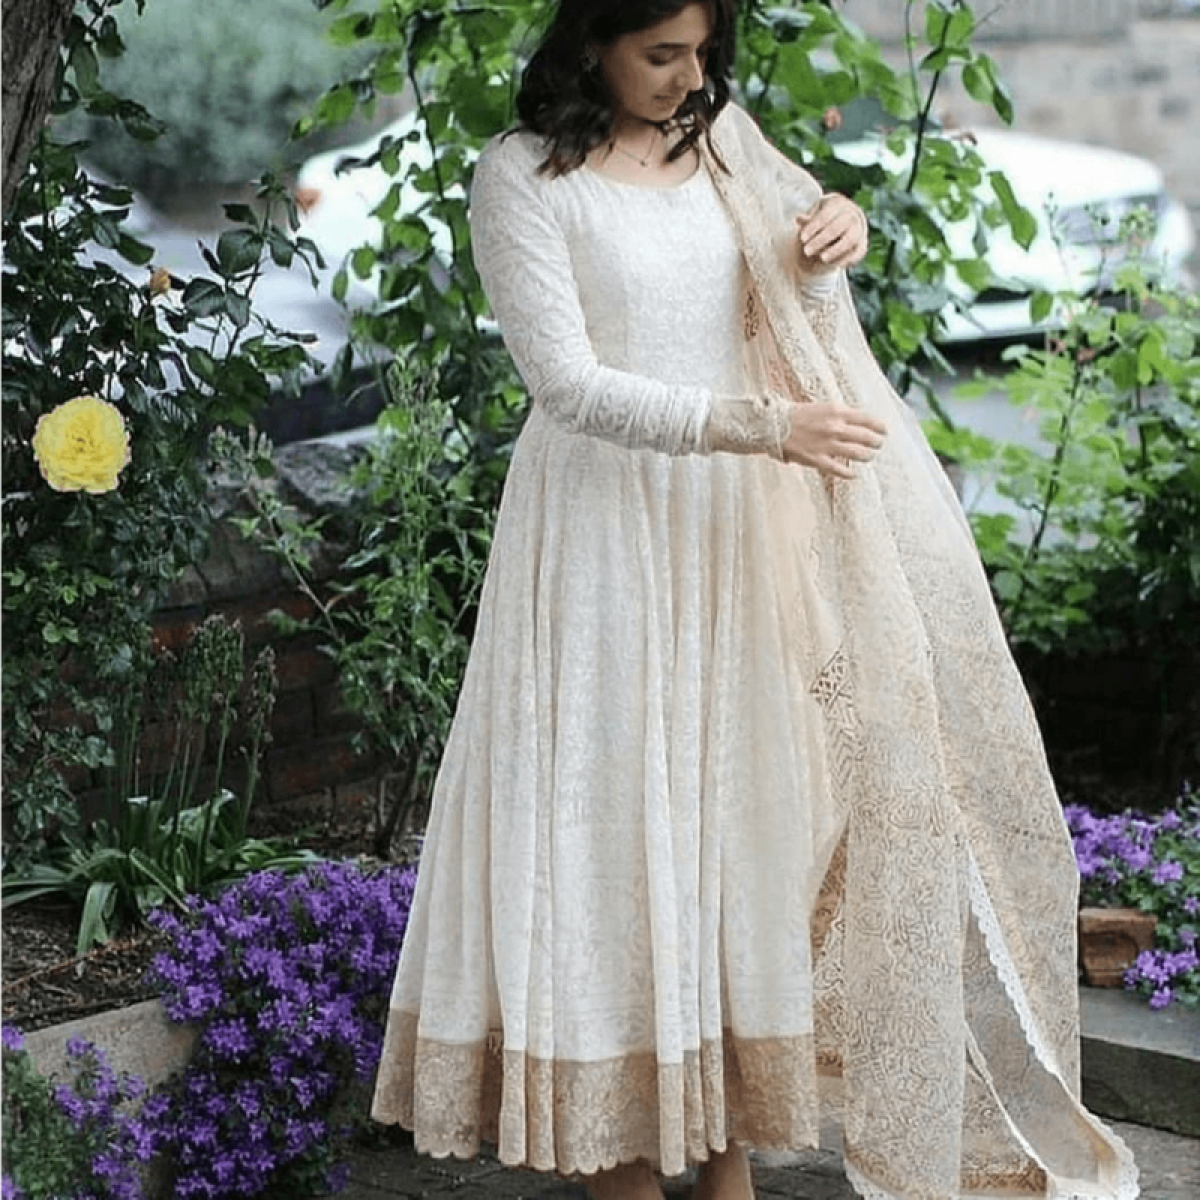 http://www.mongoosekart.com/image/cache/data/1newarrival/White%20Color%20Beautiful%20Ready%20made%20Anarkali%20Suit-1200x1200.png